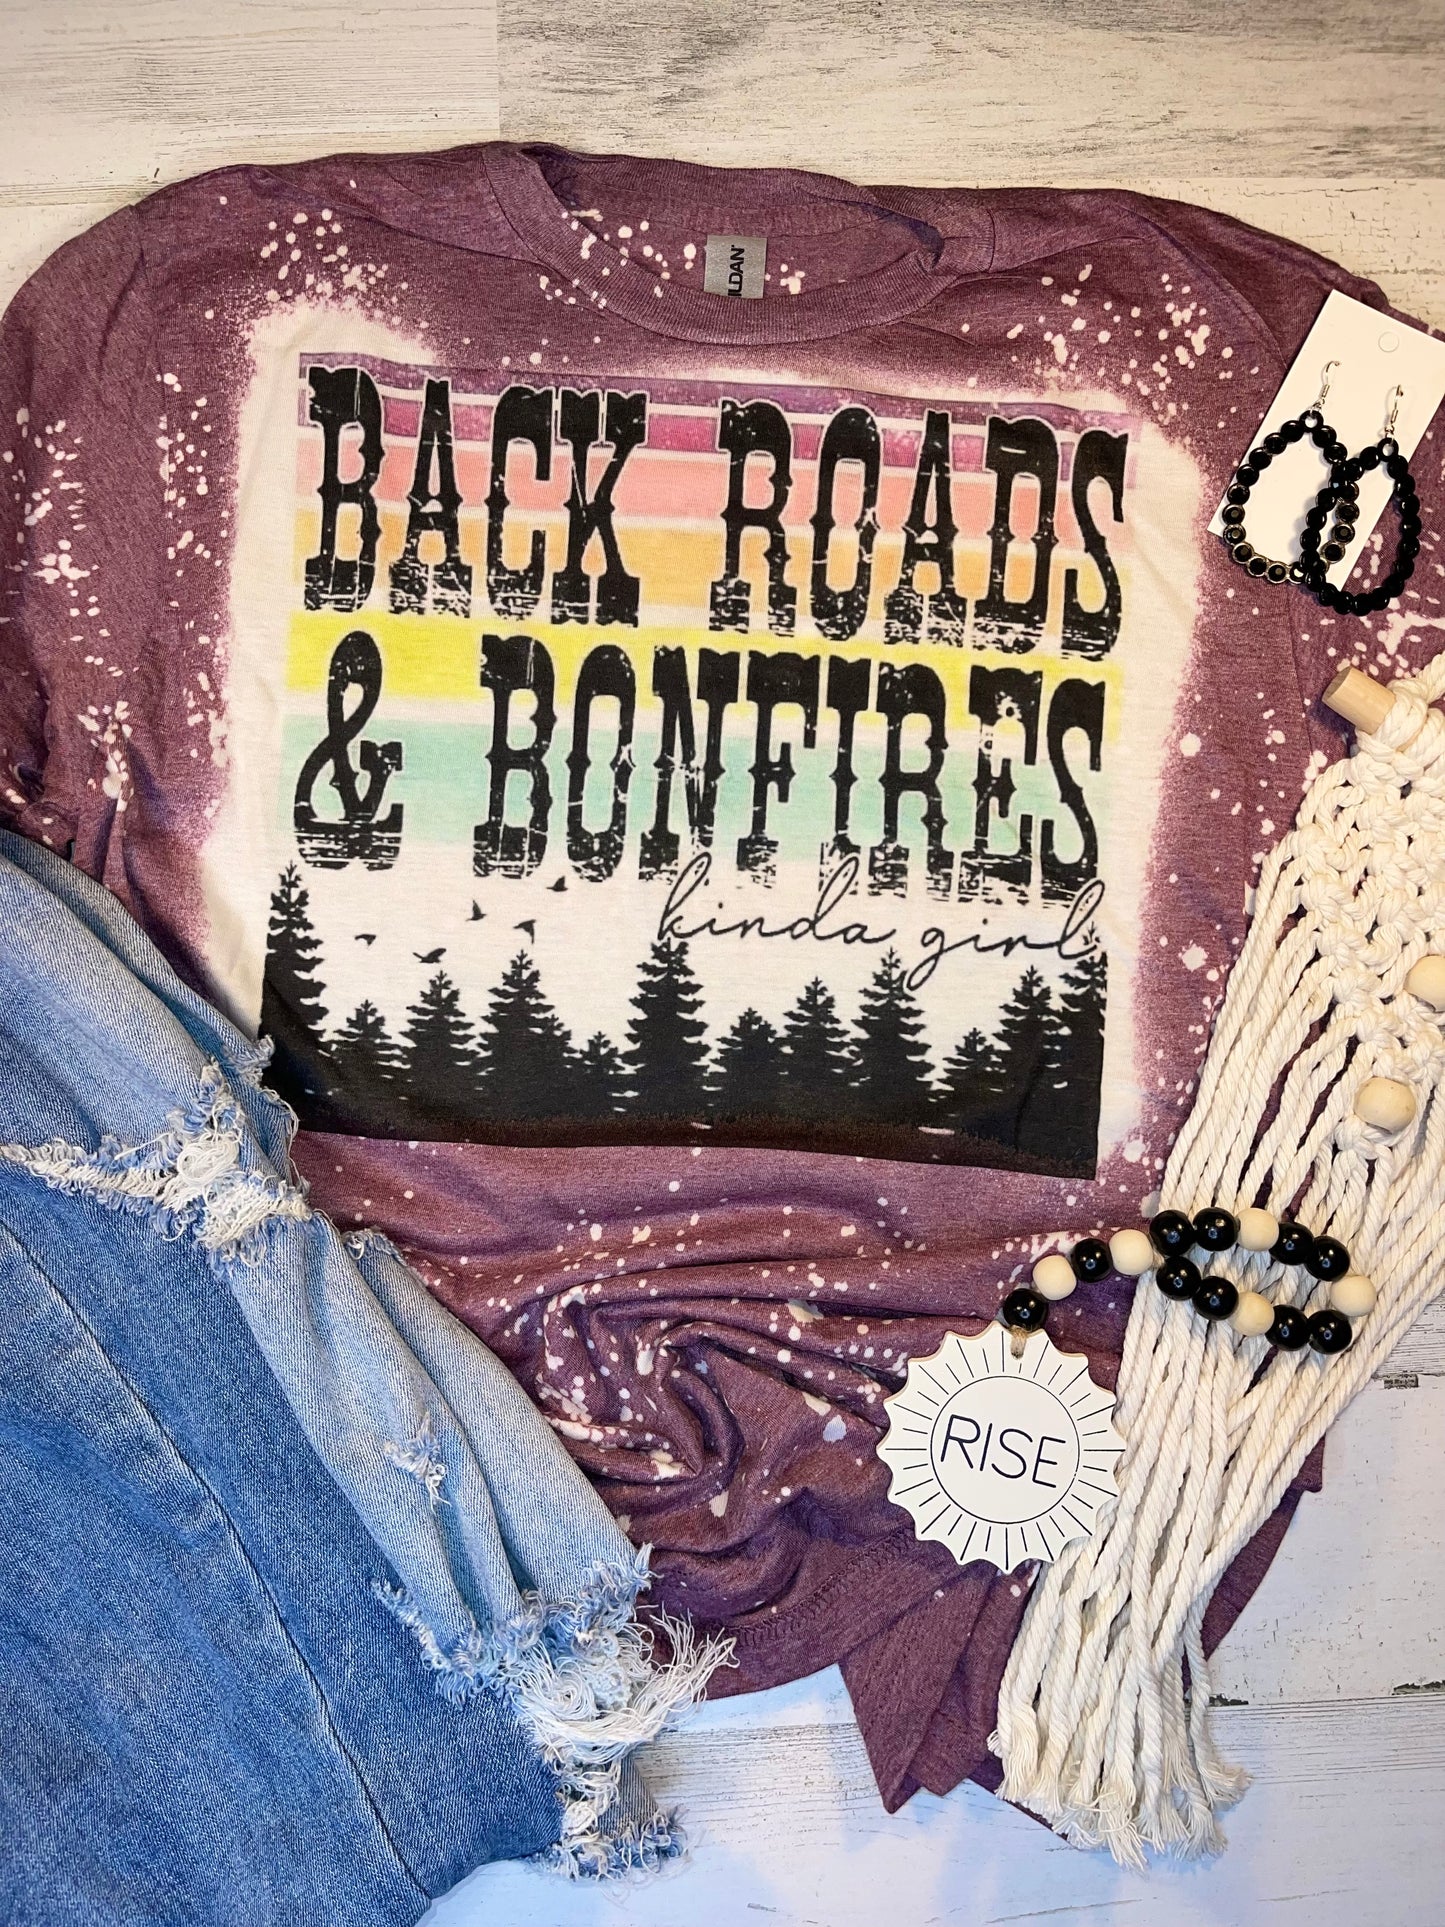 Product details  Custom sublimated tee that reads “Back Roads and Boom Fires Kind of Girl" Pressed on a soft style Gildan shirt Short sleeve  Fits true to size Contact us about a custom color shirt.  Southern Bliss Boutique